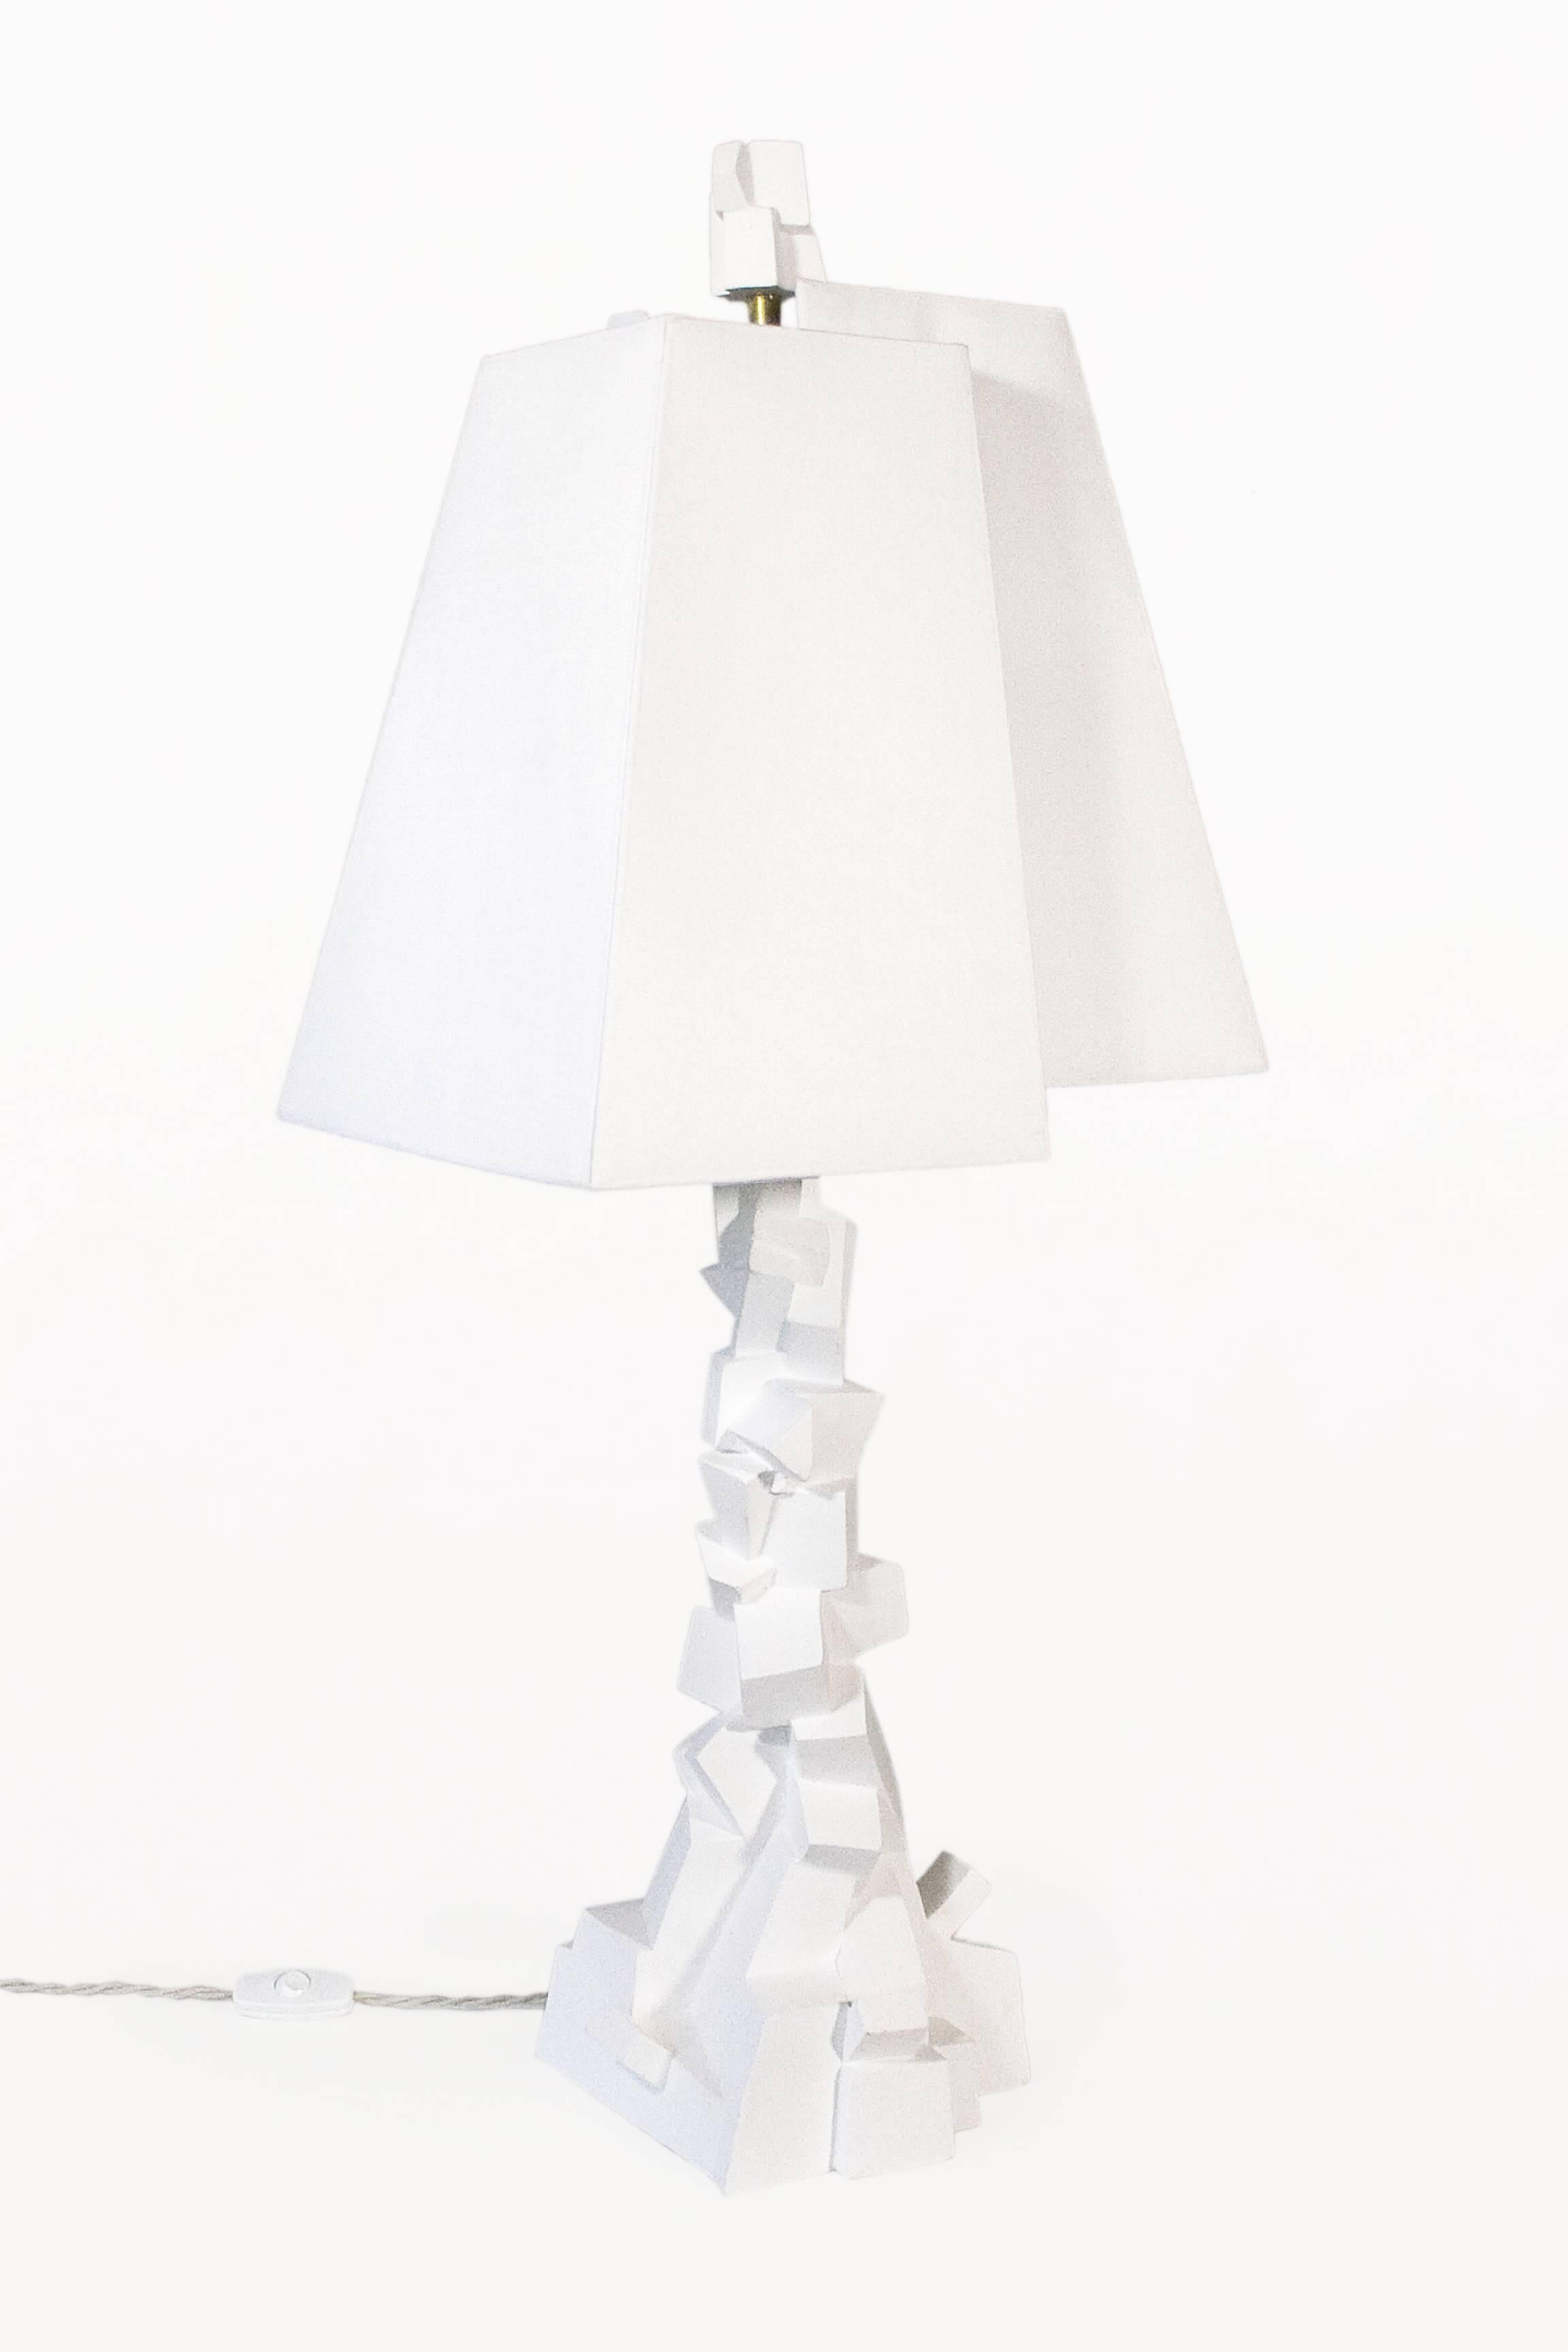 Pair of Brutalist table lamps by Jean-Jacques Darbaud.
Sculpted plaster brutalist base and lampshade.
Beautiful Darbaud design.
Limited edition.
circa 2015, France.
Very good condition.